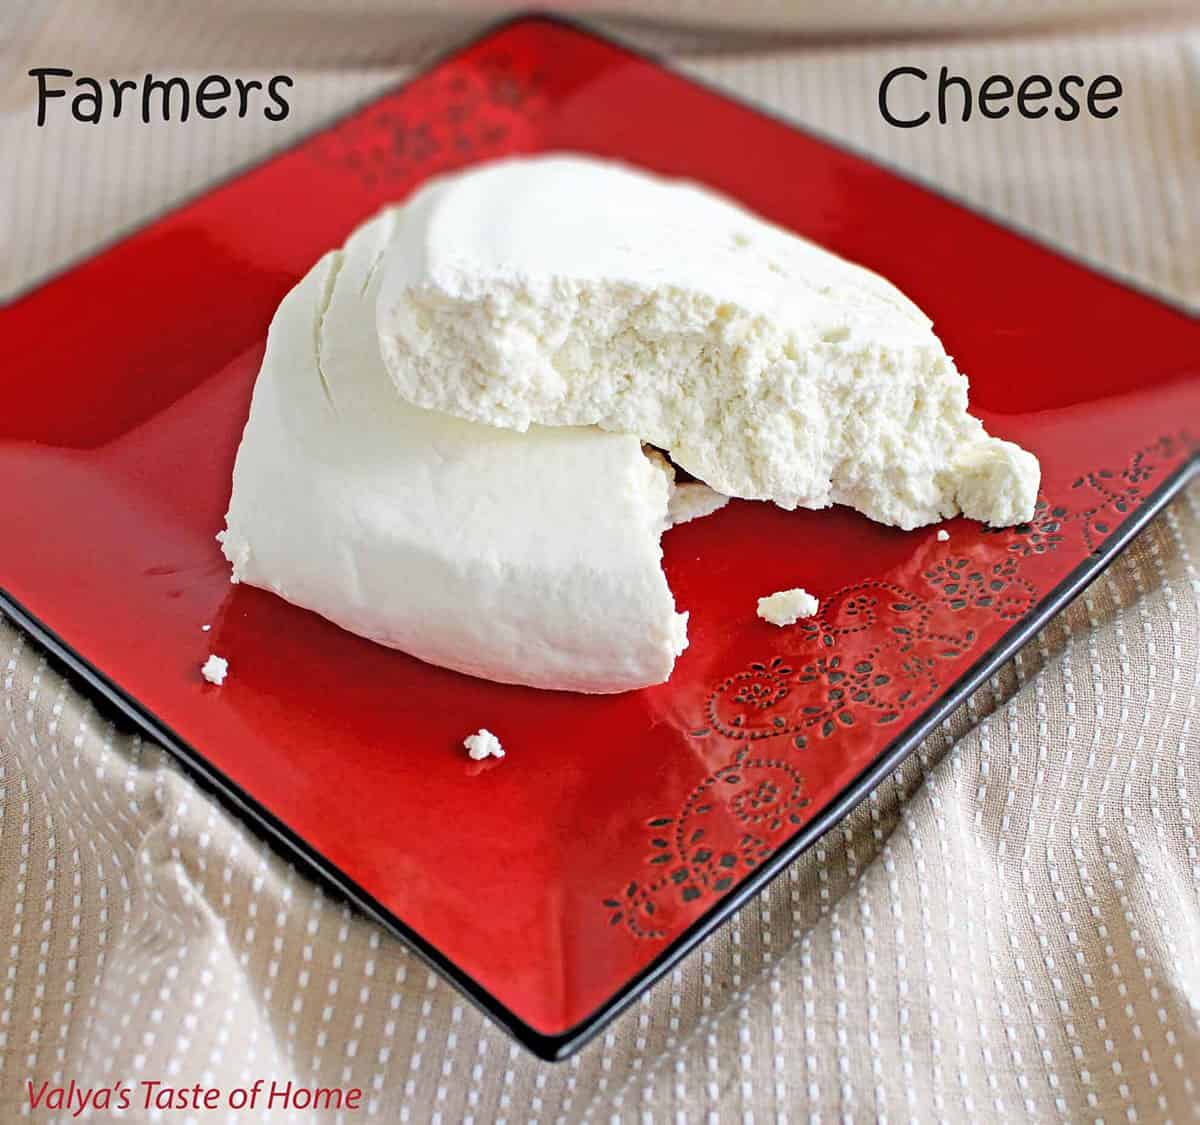 This Farmer's Cheese recipe is special because it is made with all-natural ingredients and does not require any preservatives or additives.